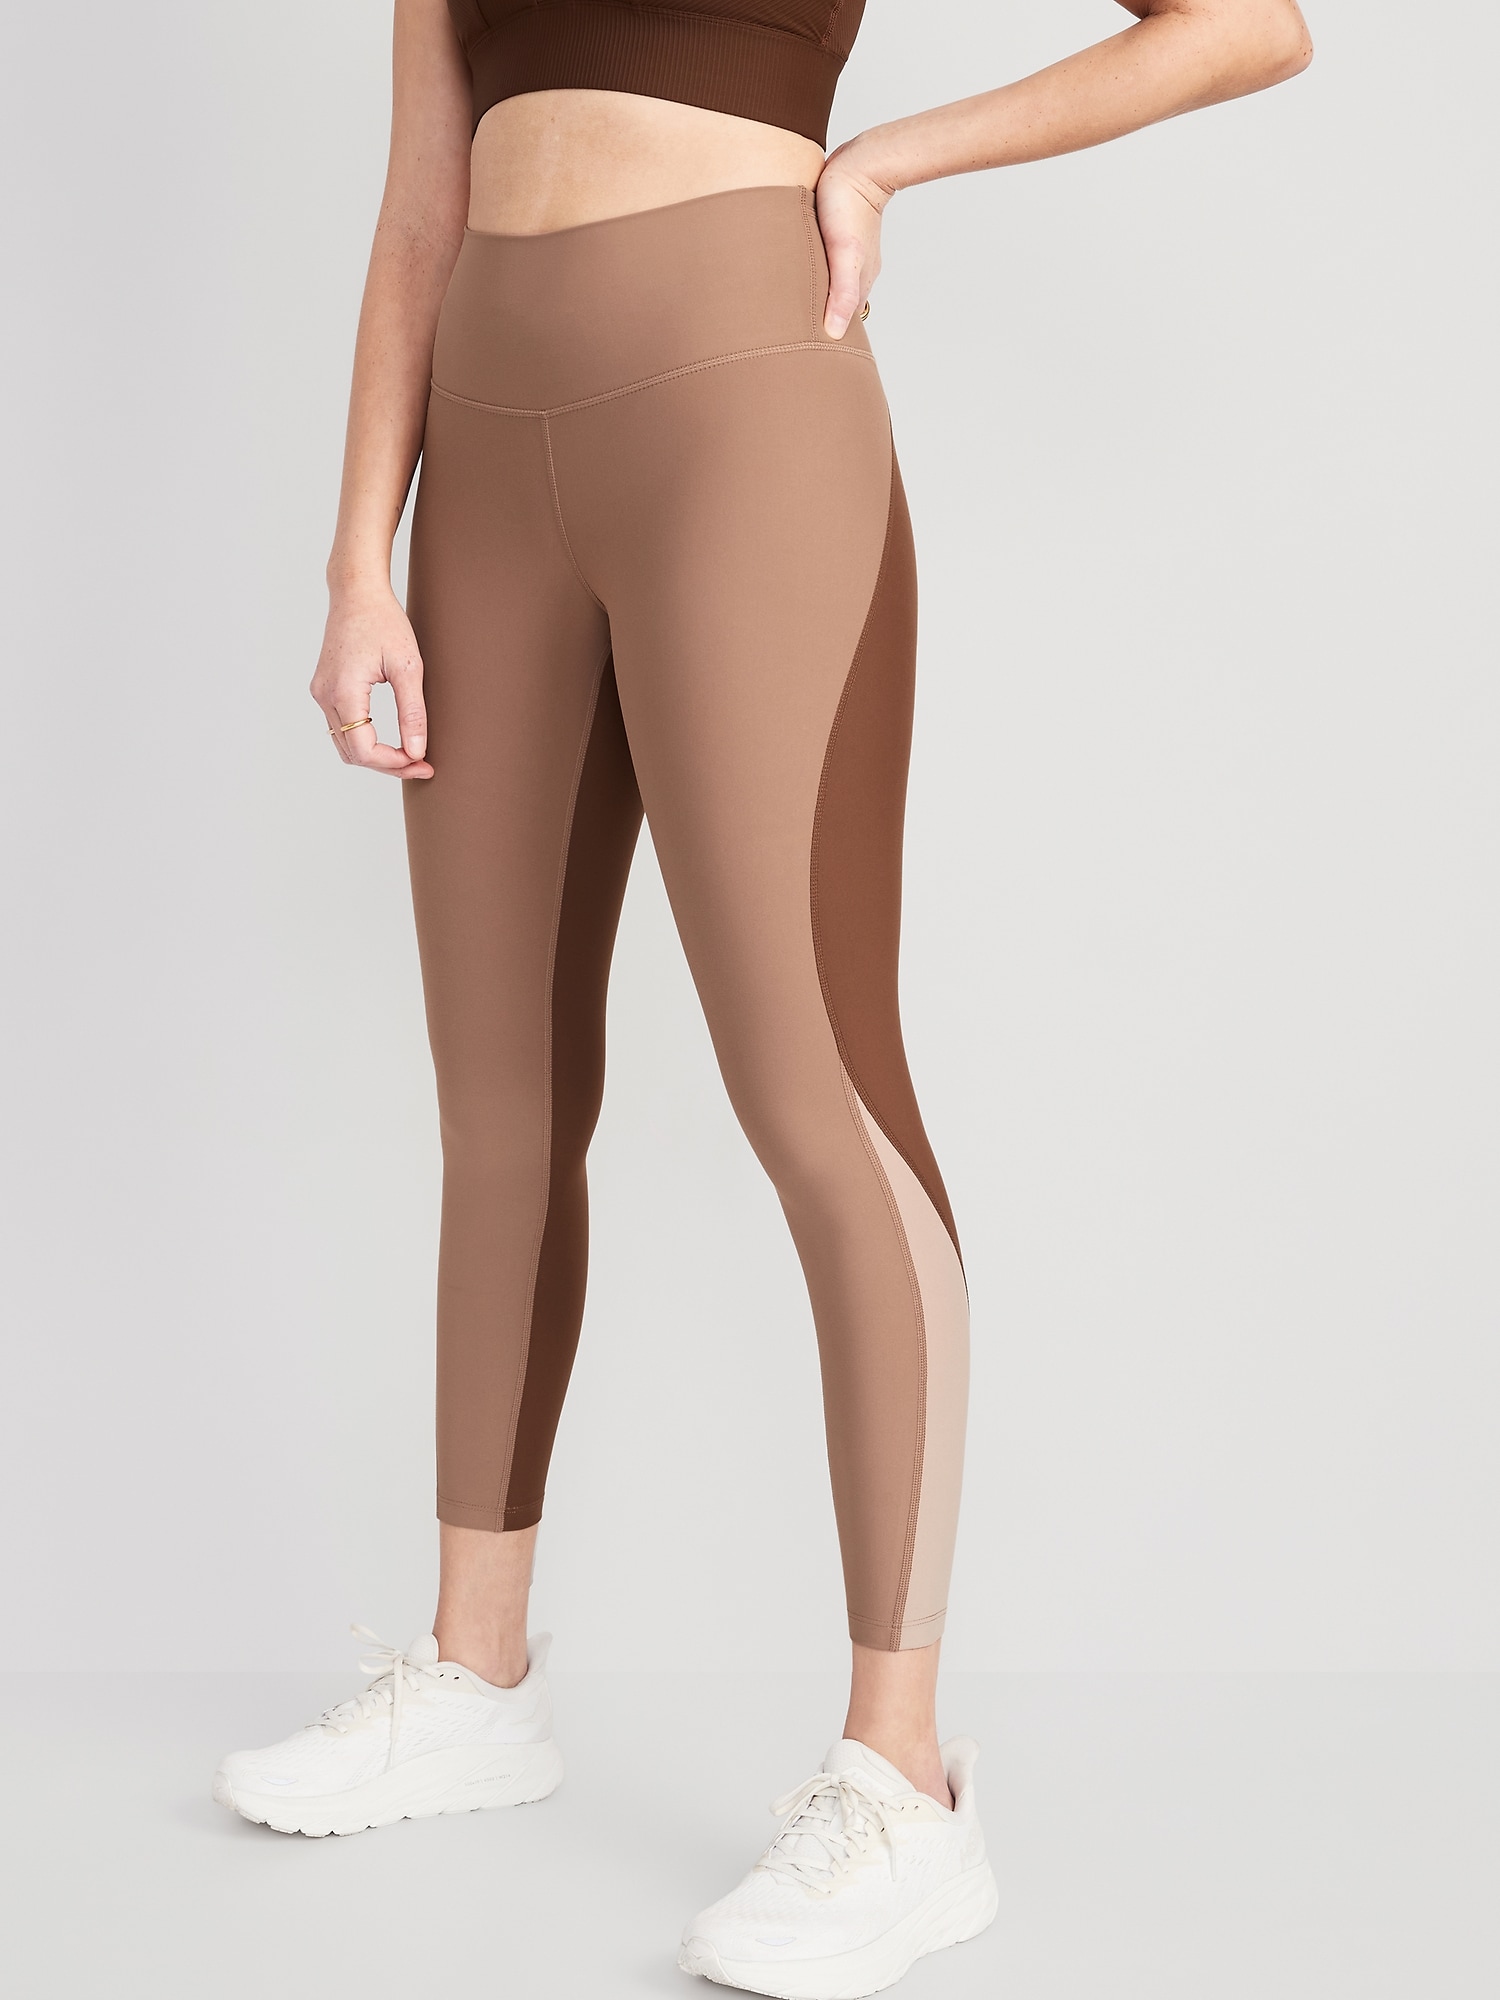 High-Waisted PowerSoft Color-Block 7/8 Compression Leggings